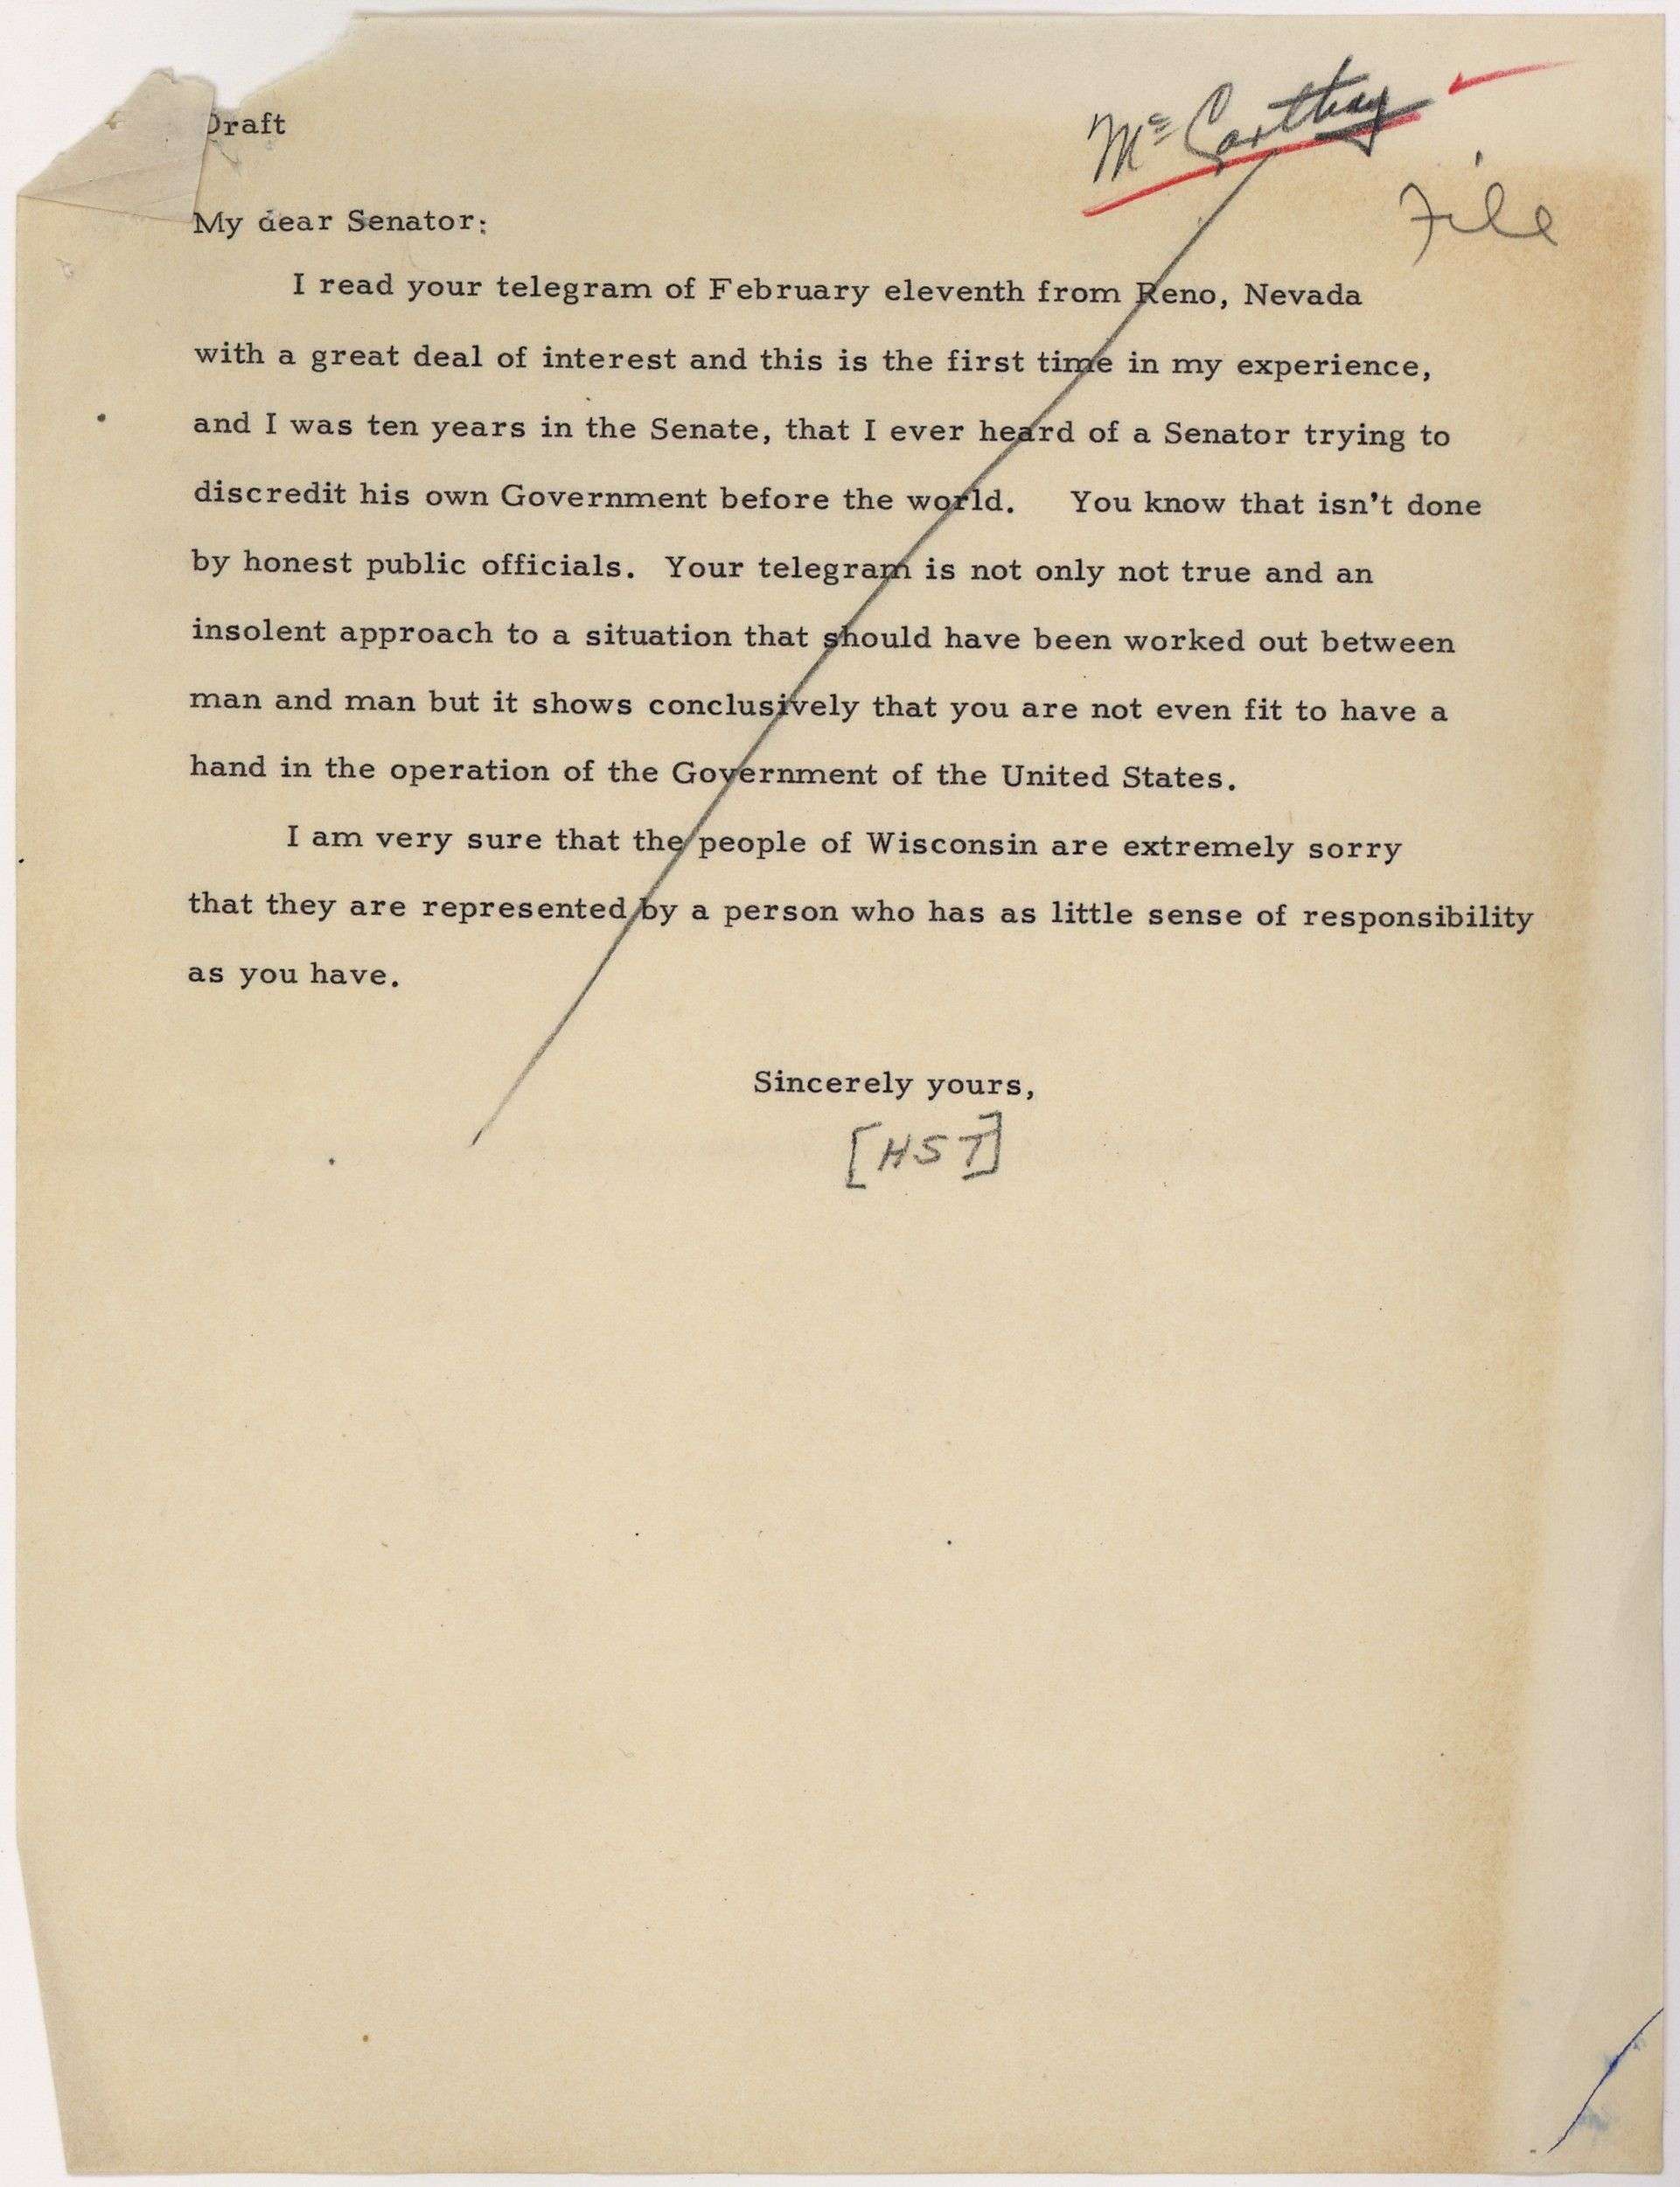 Truman’s unsent reply to McCarthy - Source: NARA's DocsTeach